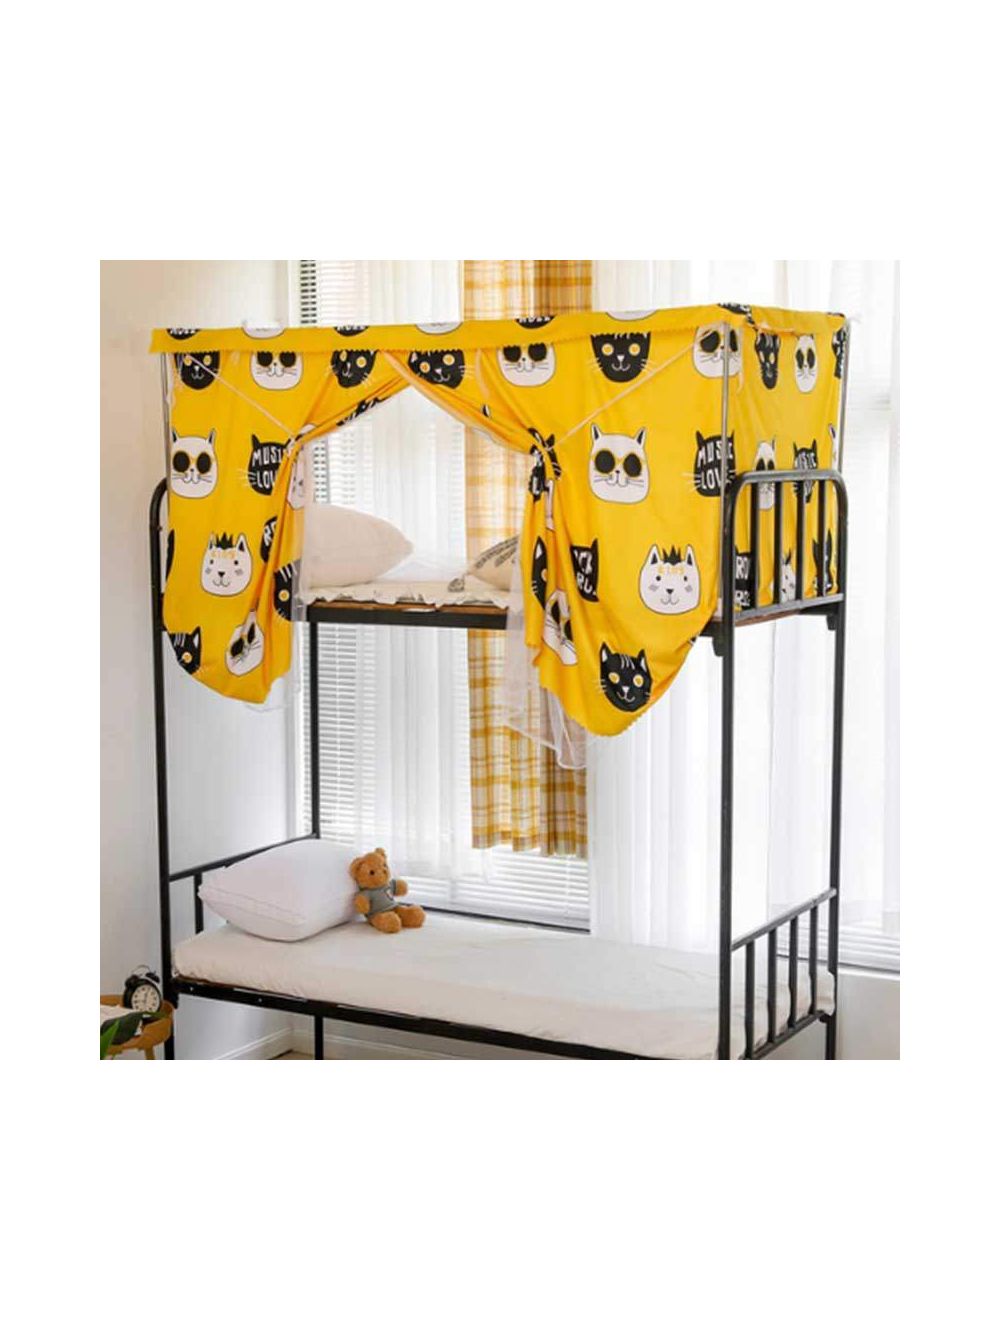 Deals for Less -Bed curtain & metal frame for upper deck single bed, Cute cat design yellow color-BCF43-01